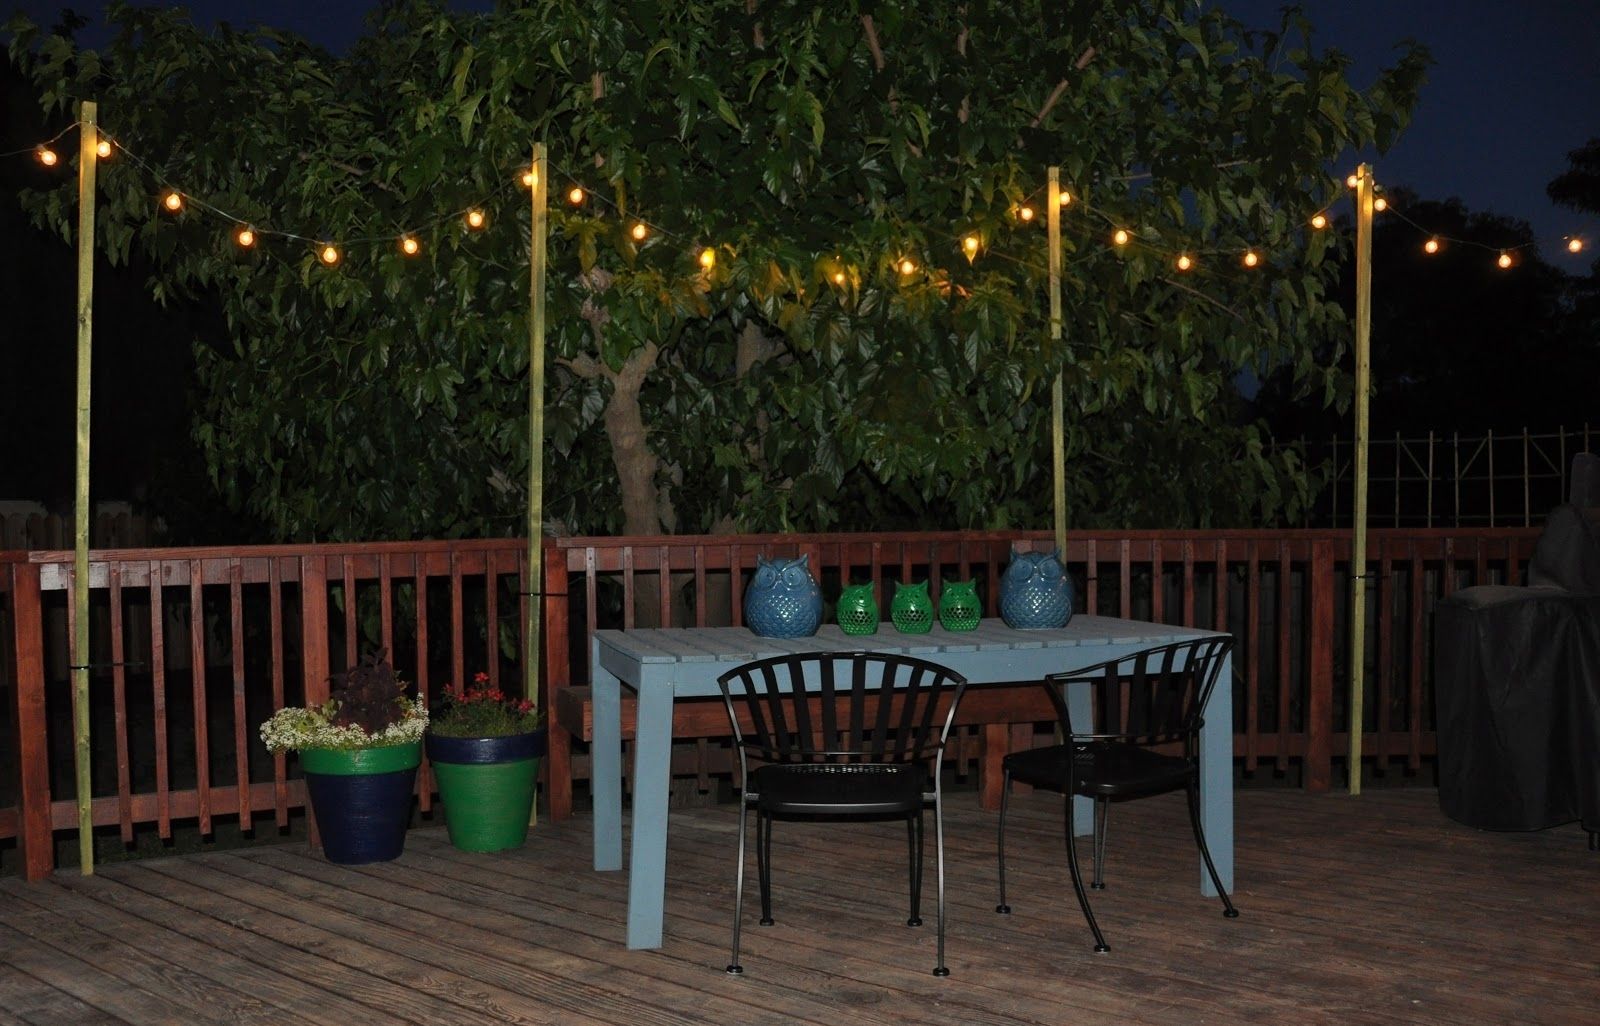 Diy : Decorative Outdoor Patio Lights Home Landscapings Hanging With Hanging Outdoor String Lights At Target (View 14 of 15)